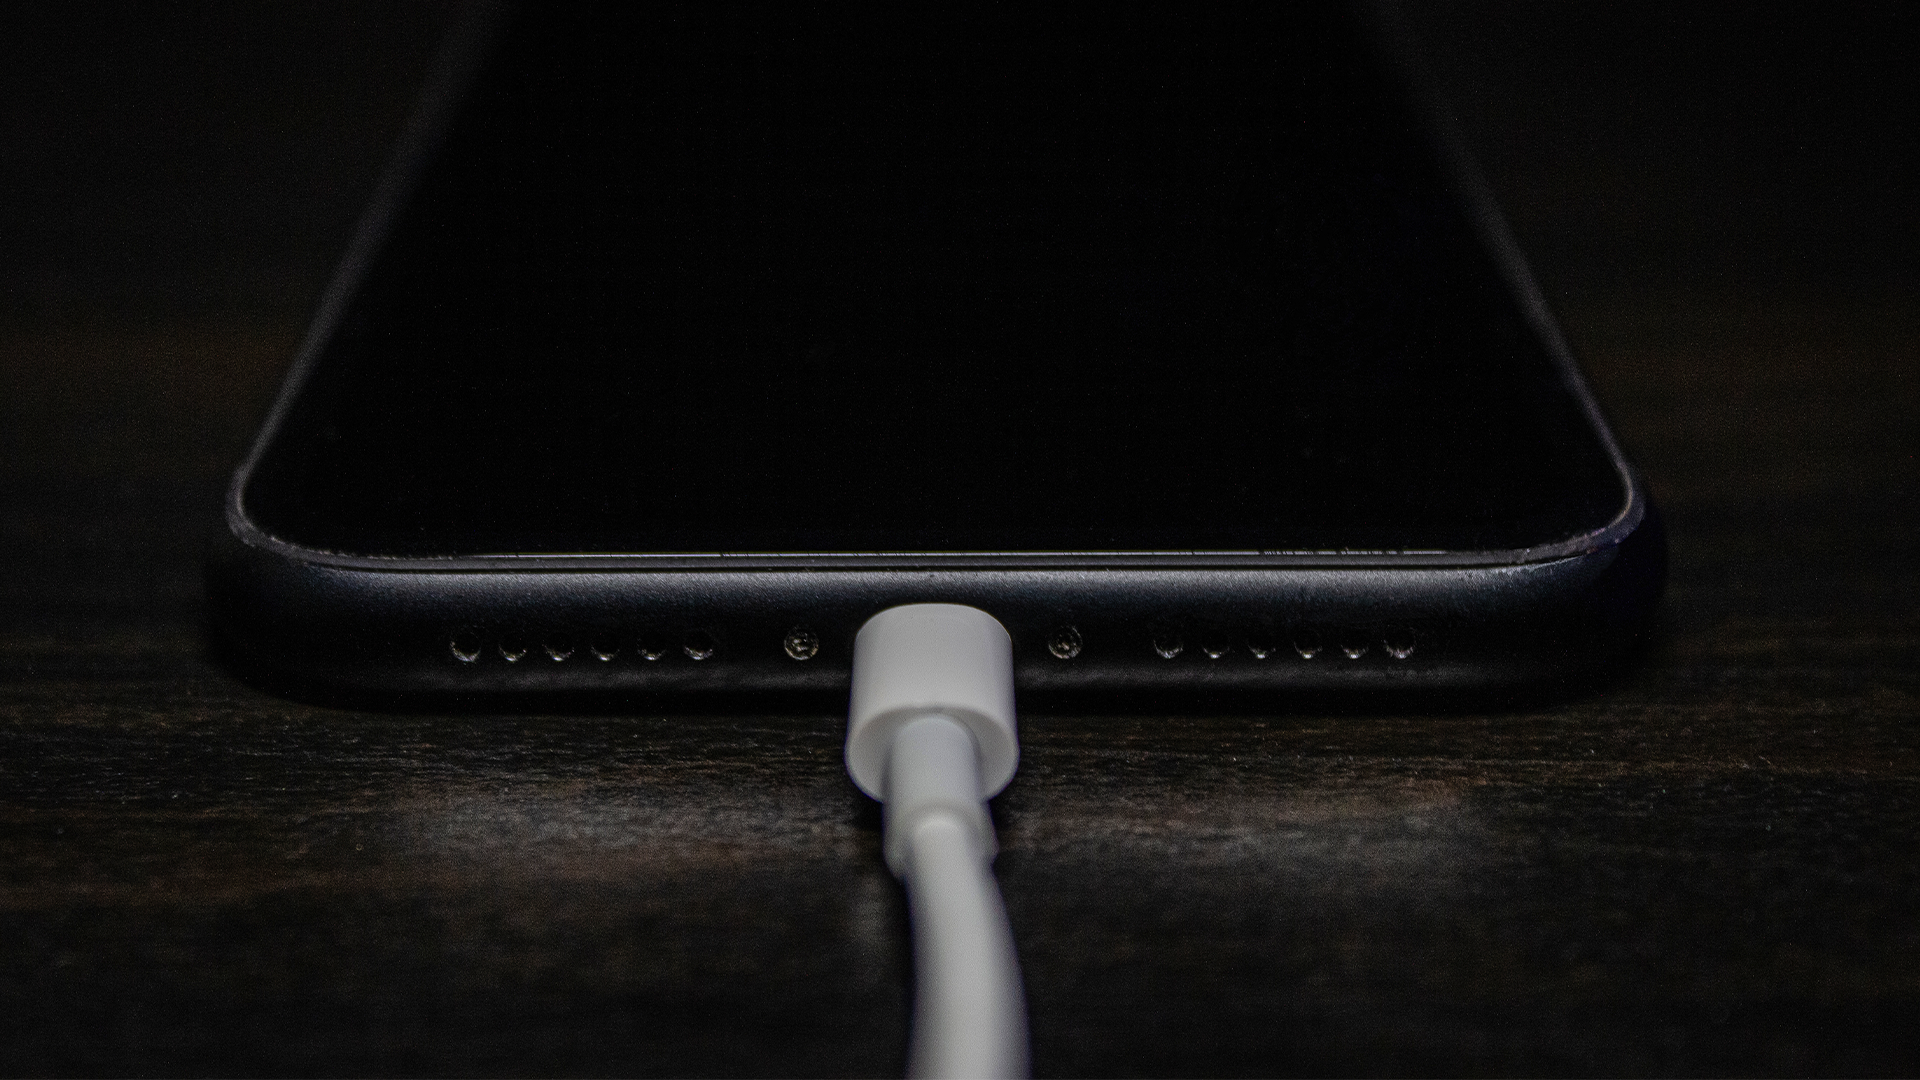 EU Gives Apple Two Years to Ditch Lightning Cables